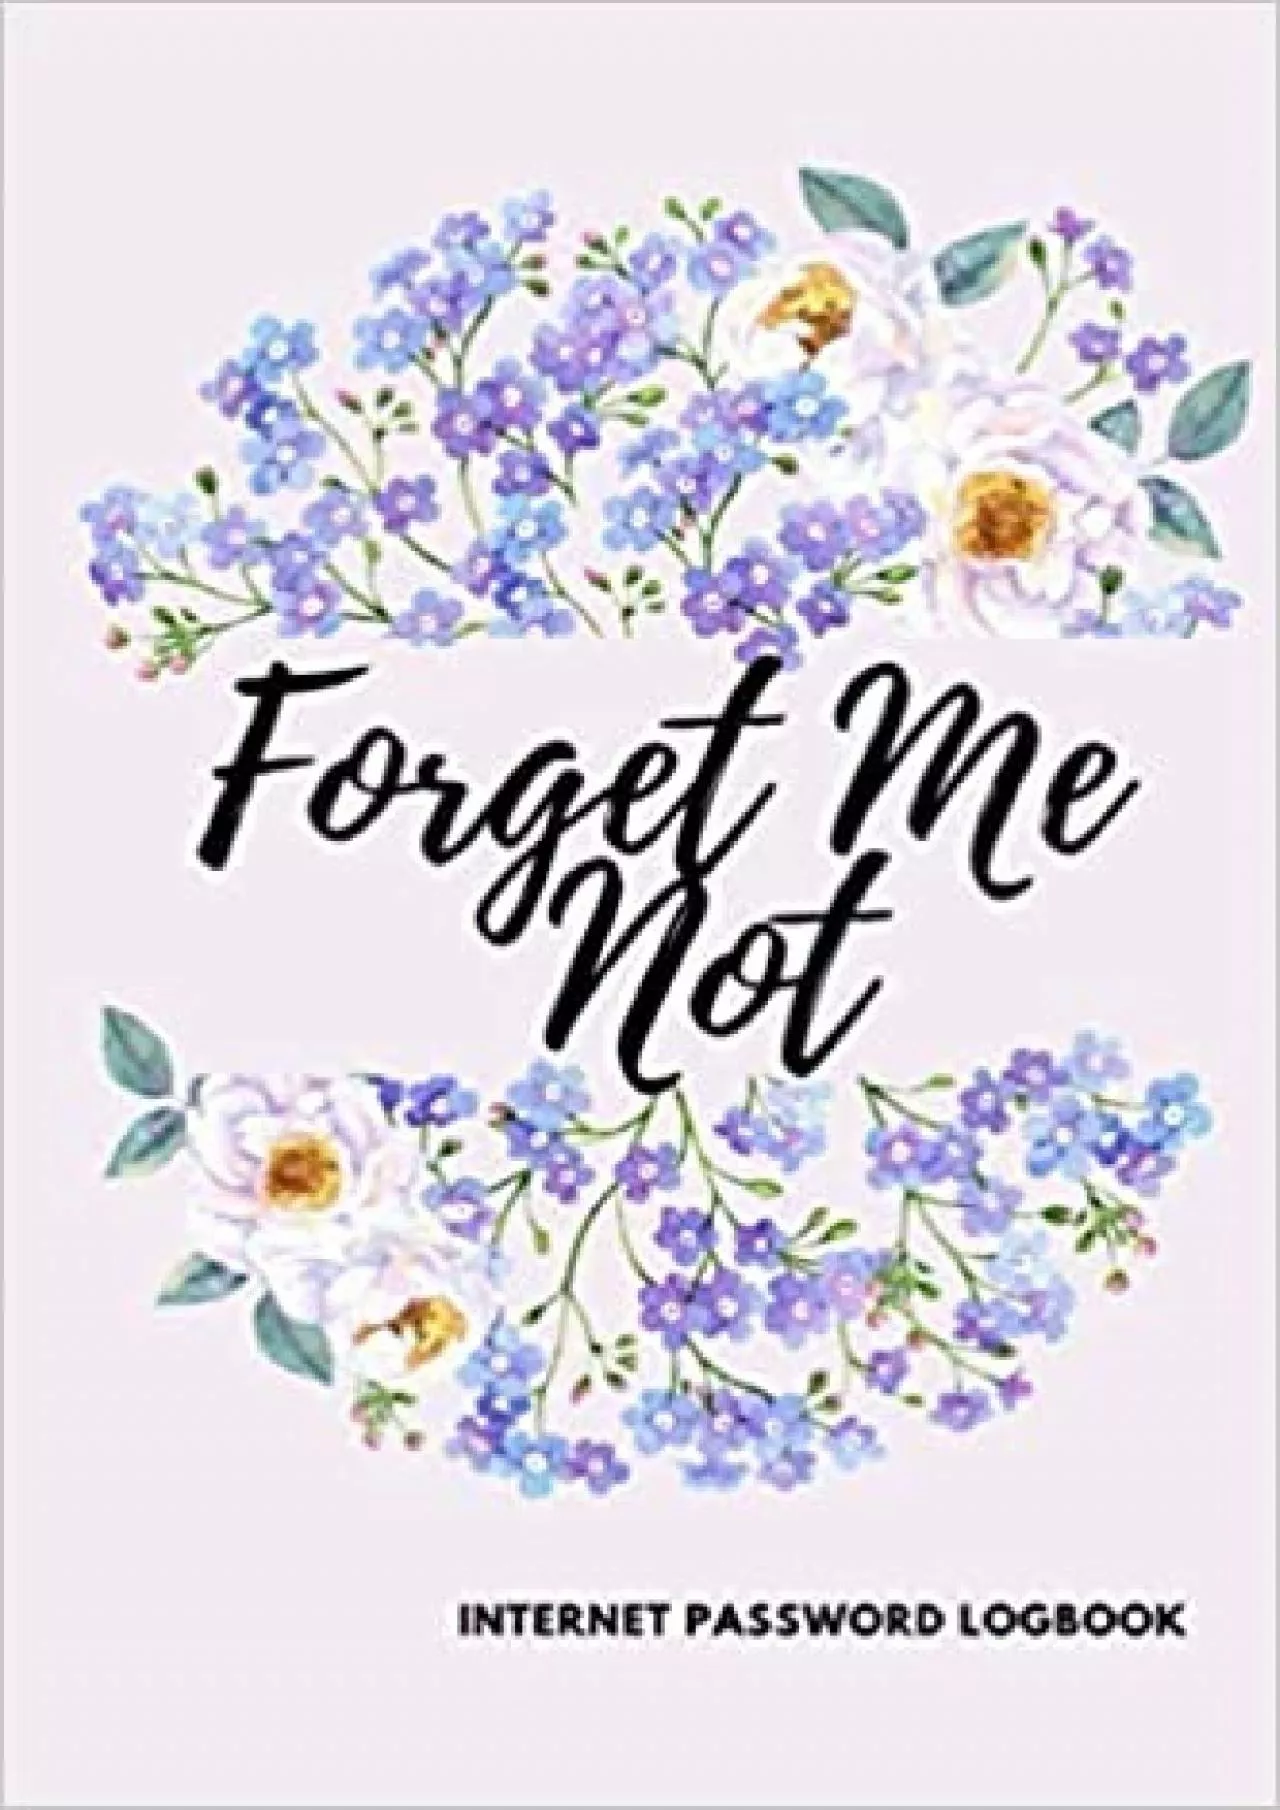 (READ)-Forget me not Internet Password Logbook: password book, internet password organizer,